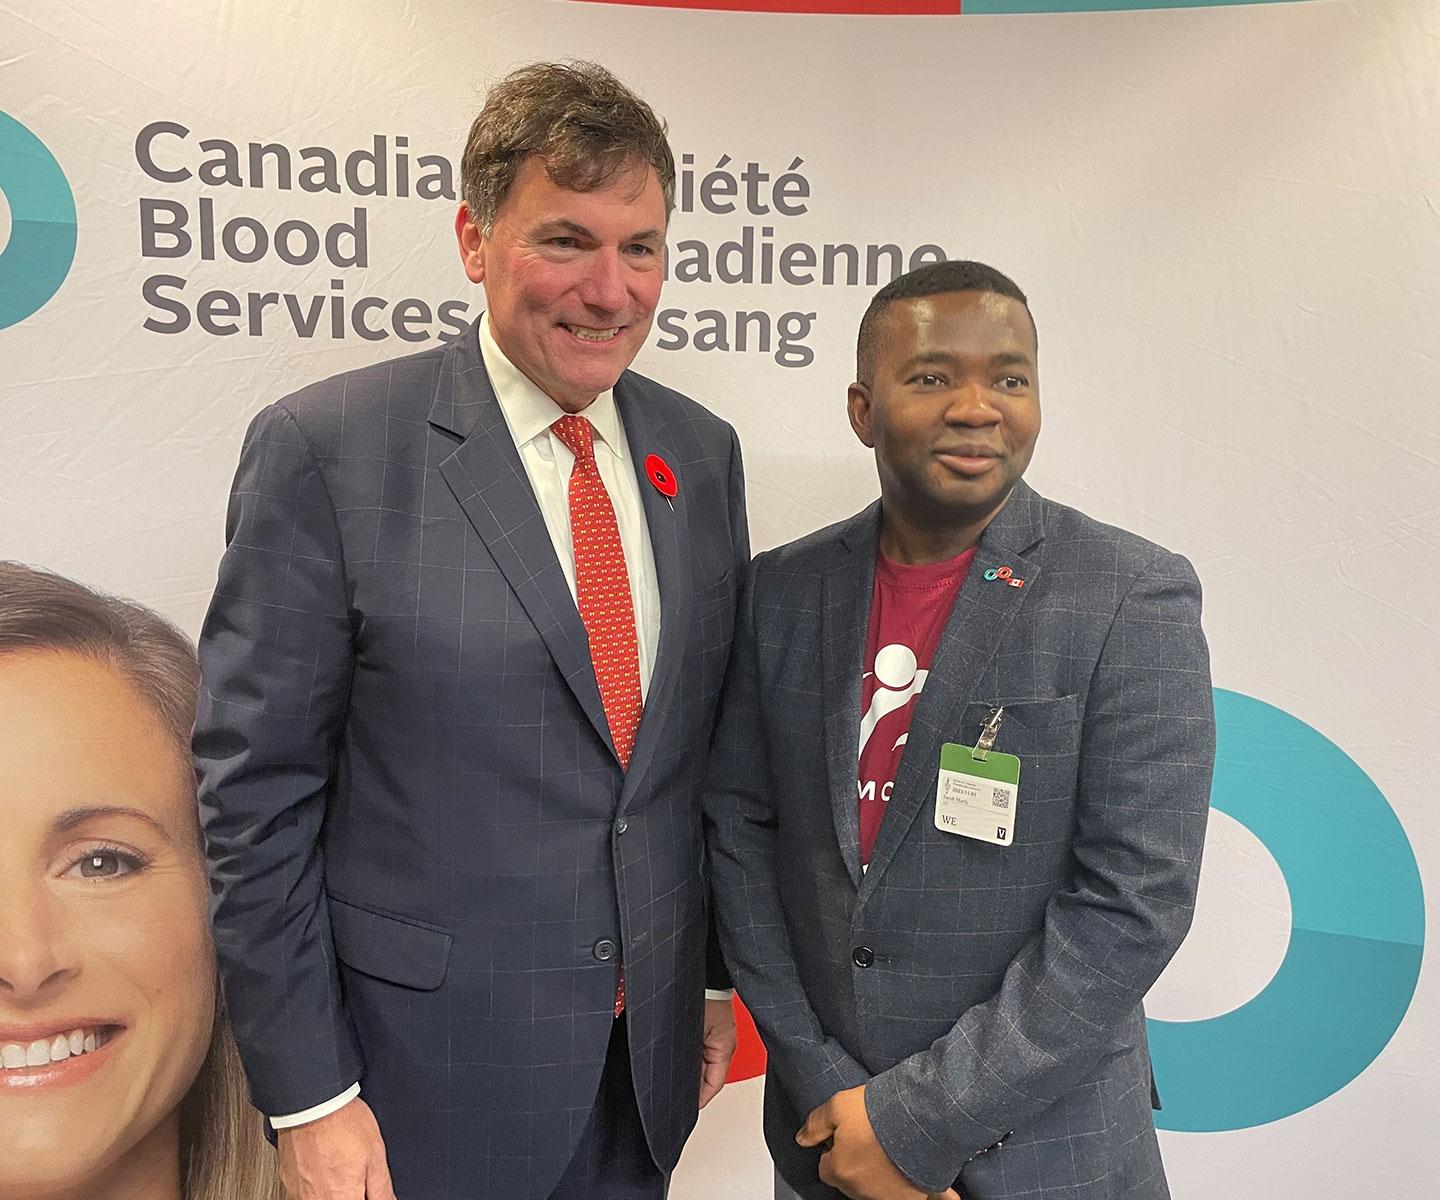 Minister Dominic LeBlanc and Jacob Marfo pose in front of a Canadian Blood Services backdrop